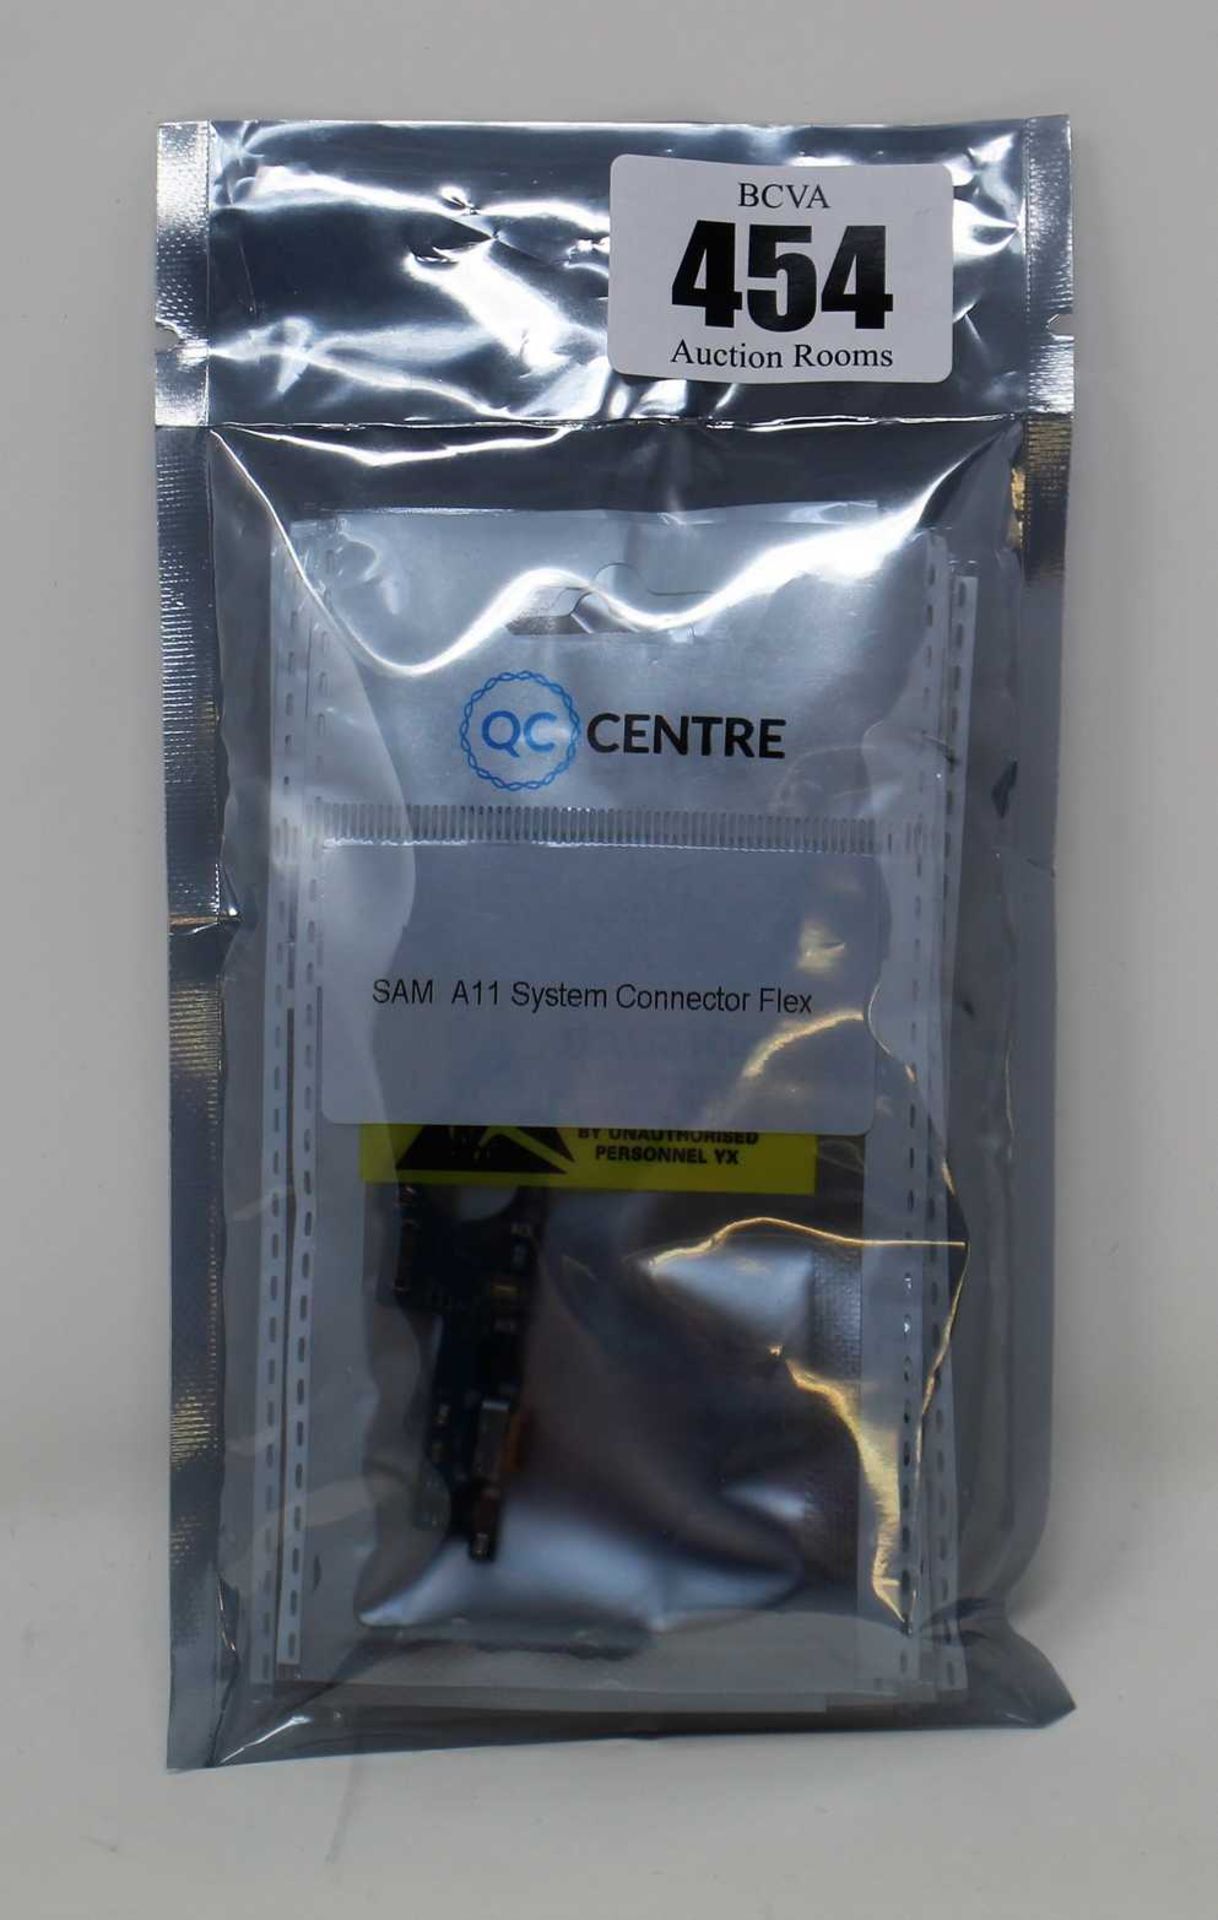 Ten as new QC Centre replacement system connector flex boards for Samsung A11 (Packaging sealed).